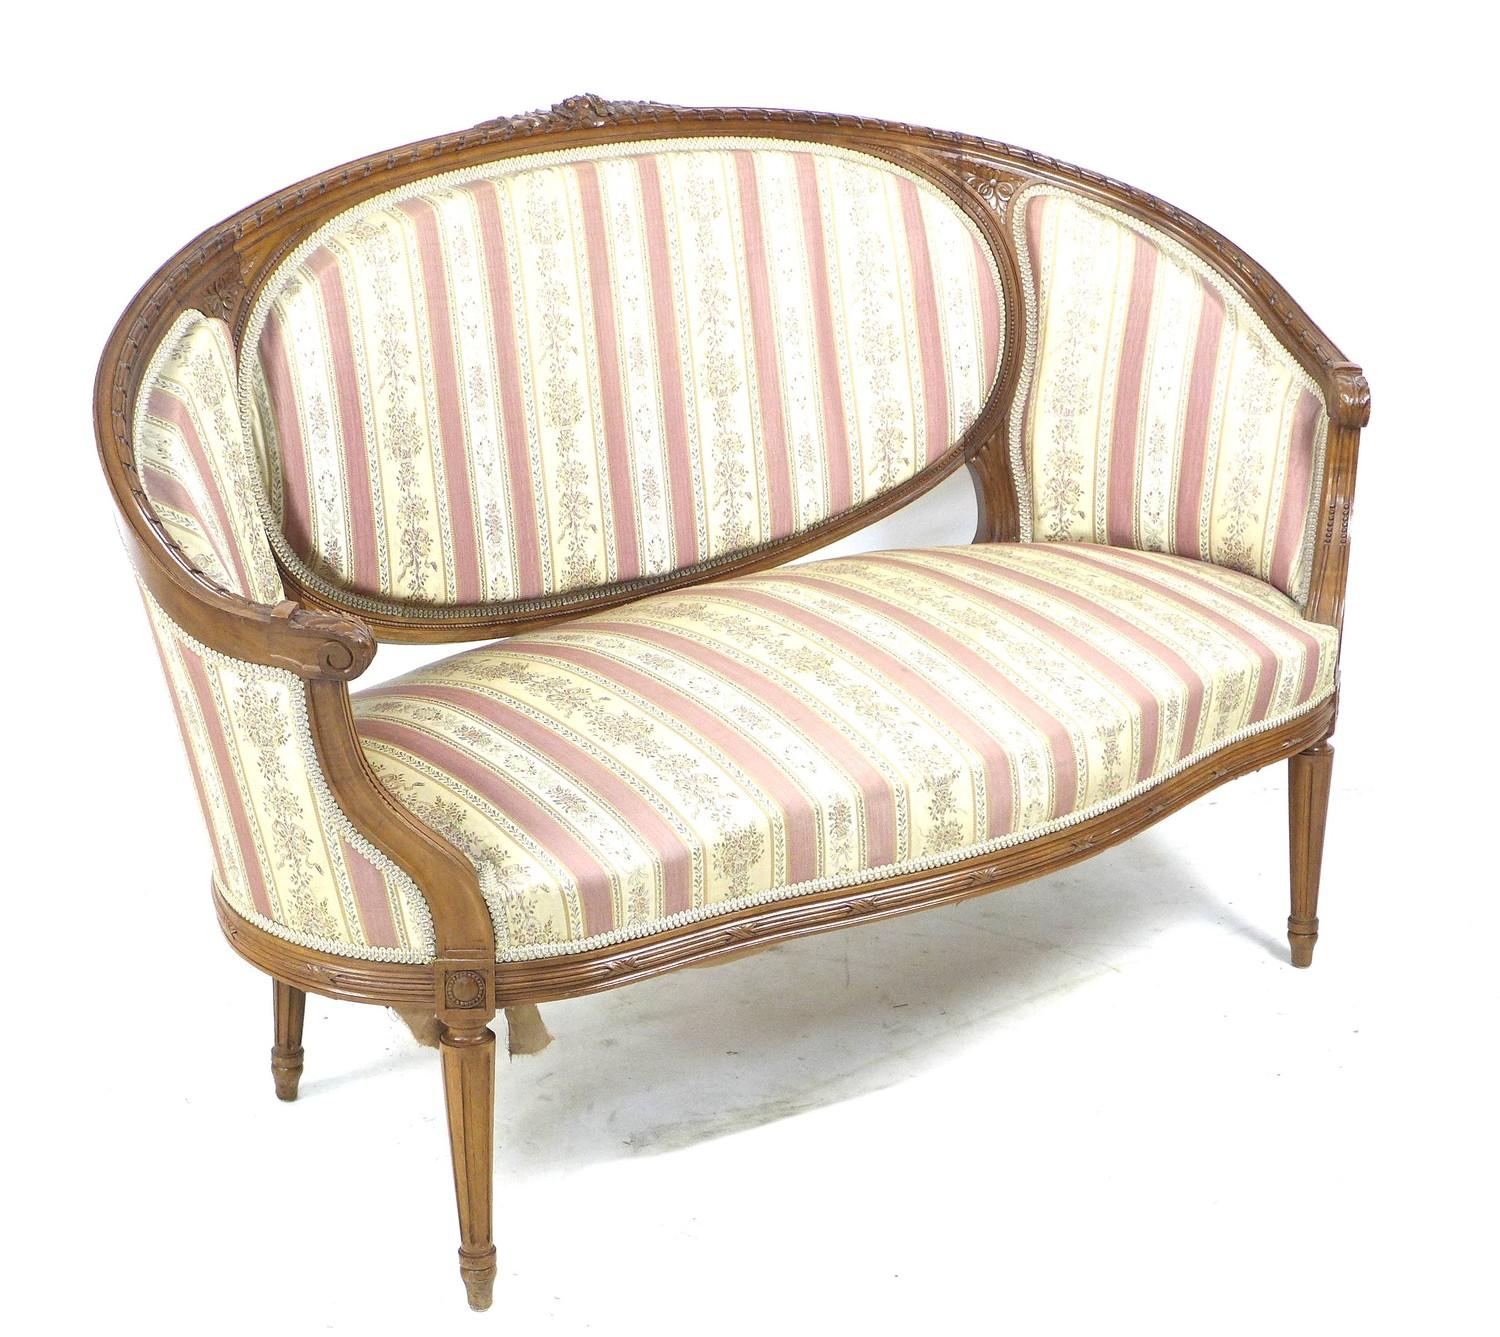 A French two seater settee, mid 20th century in Louis XVI style, with curved back with integral - Image 2 of 4